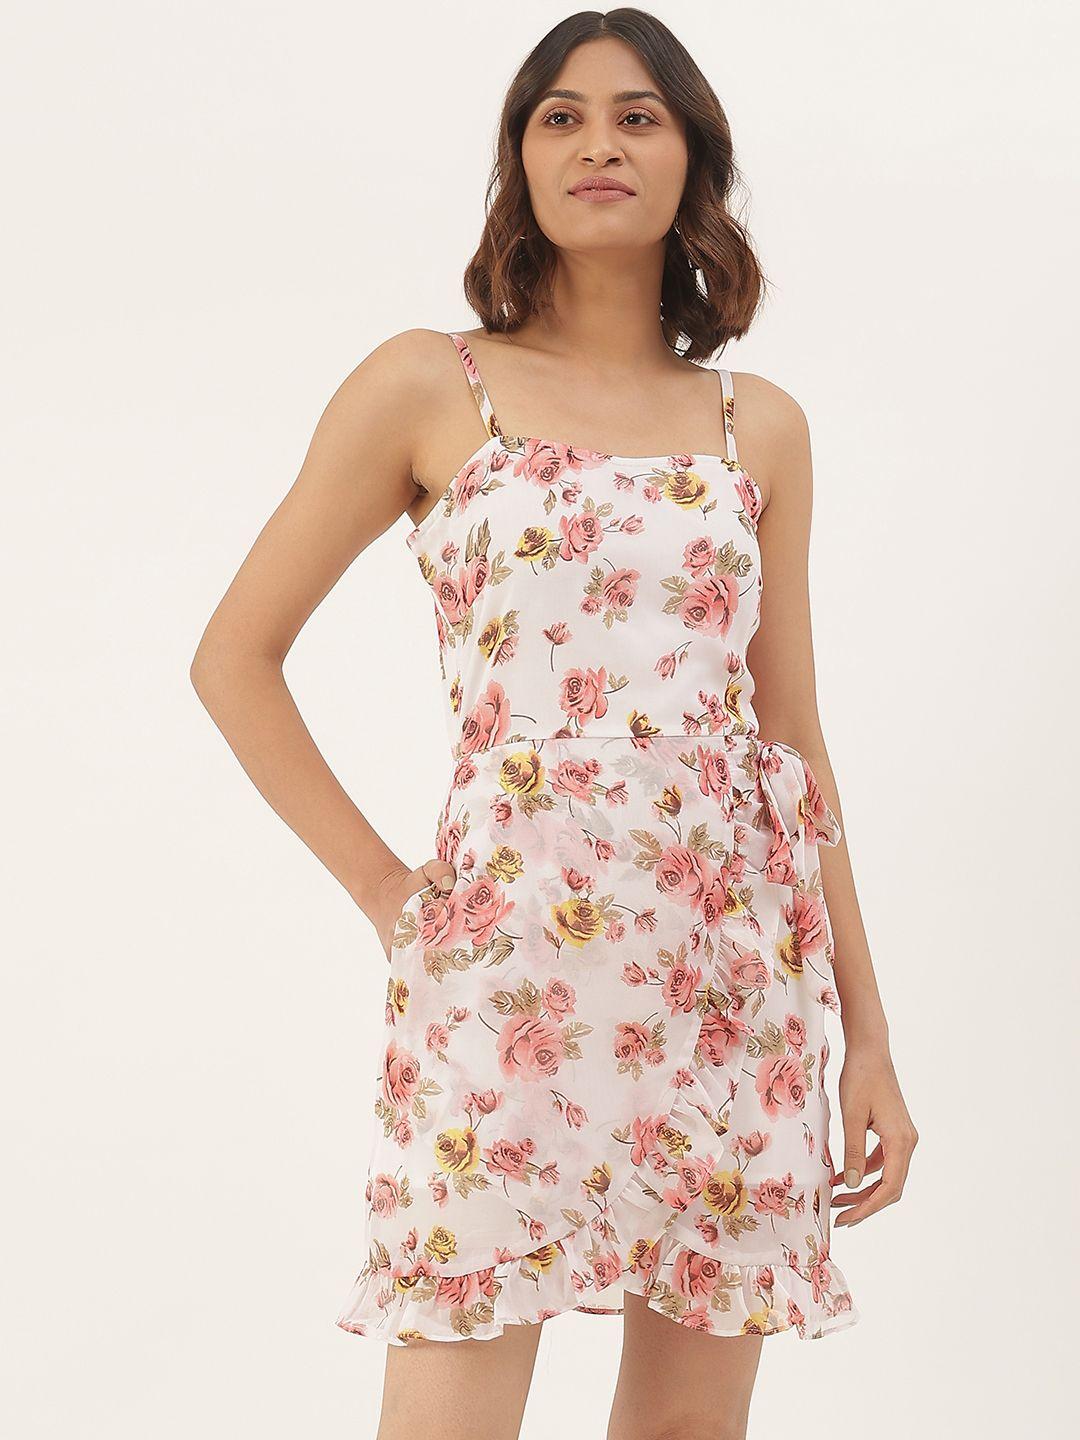 brinns off white & pink floral layered georgette a-line dress